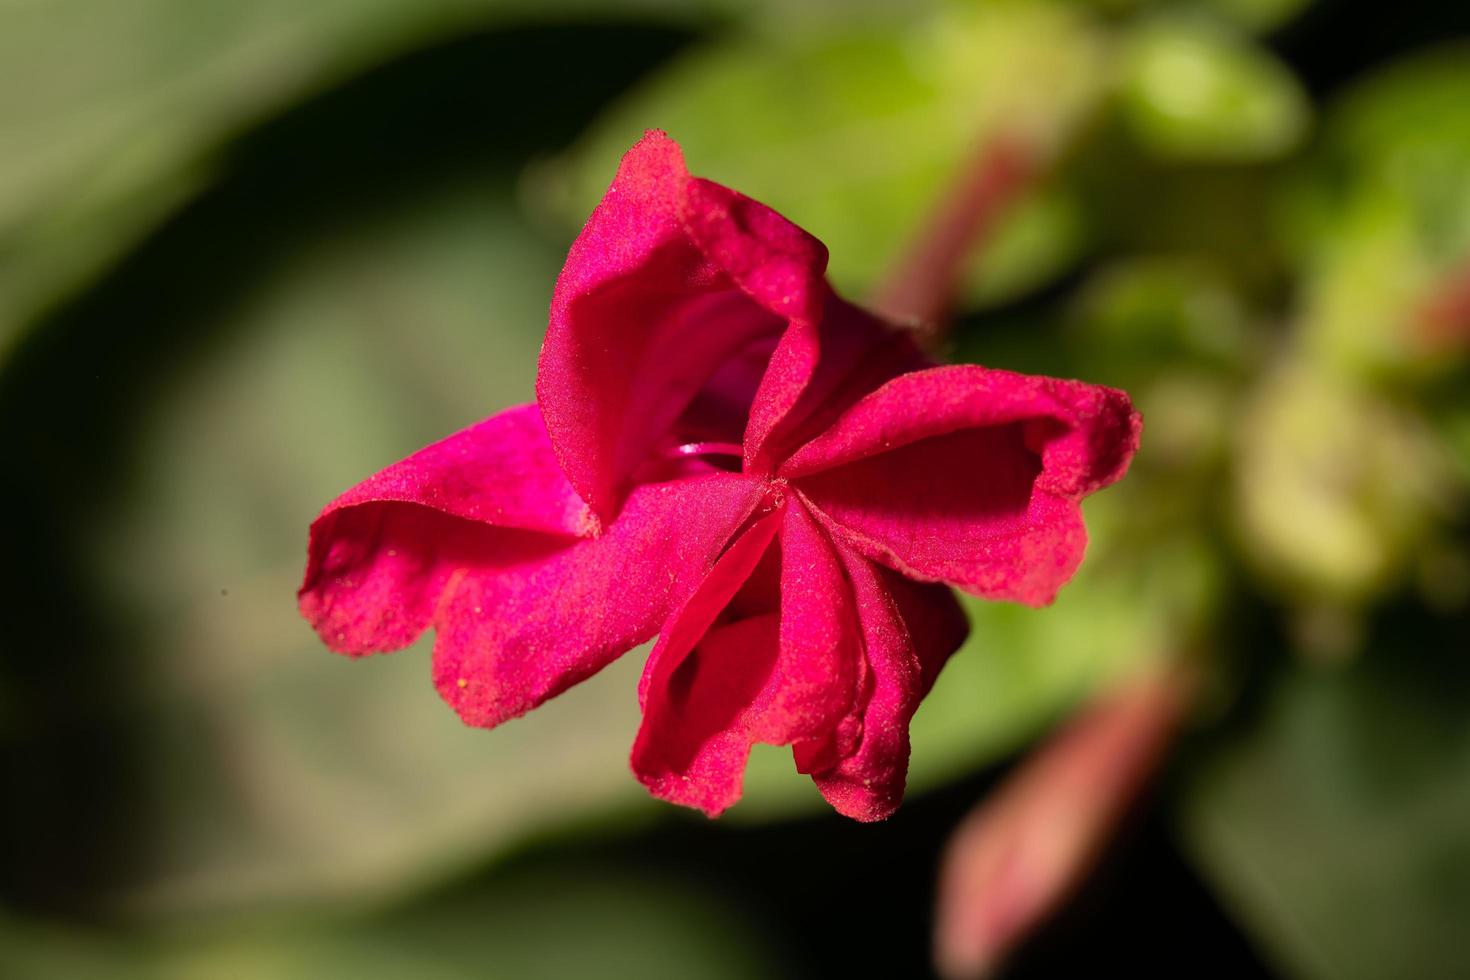 Close-up photo of a red flower